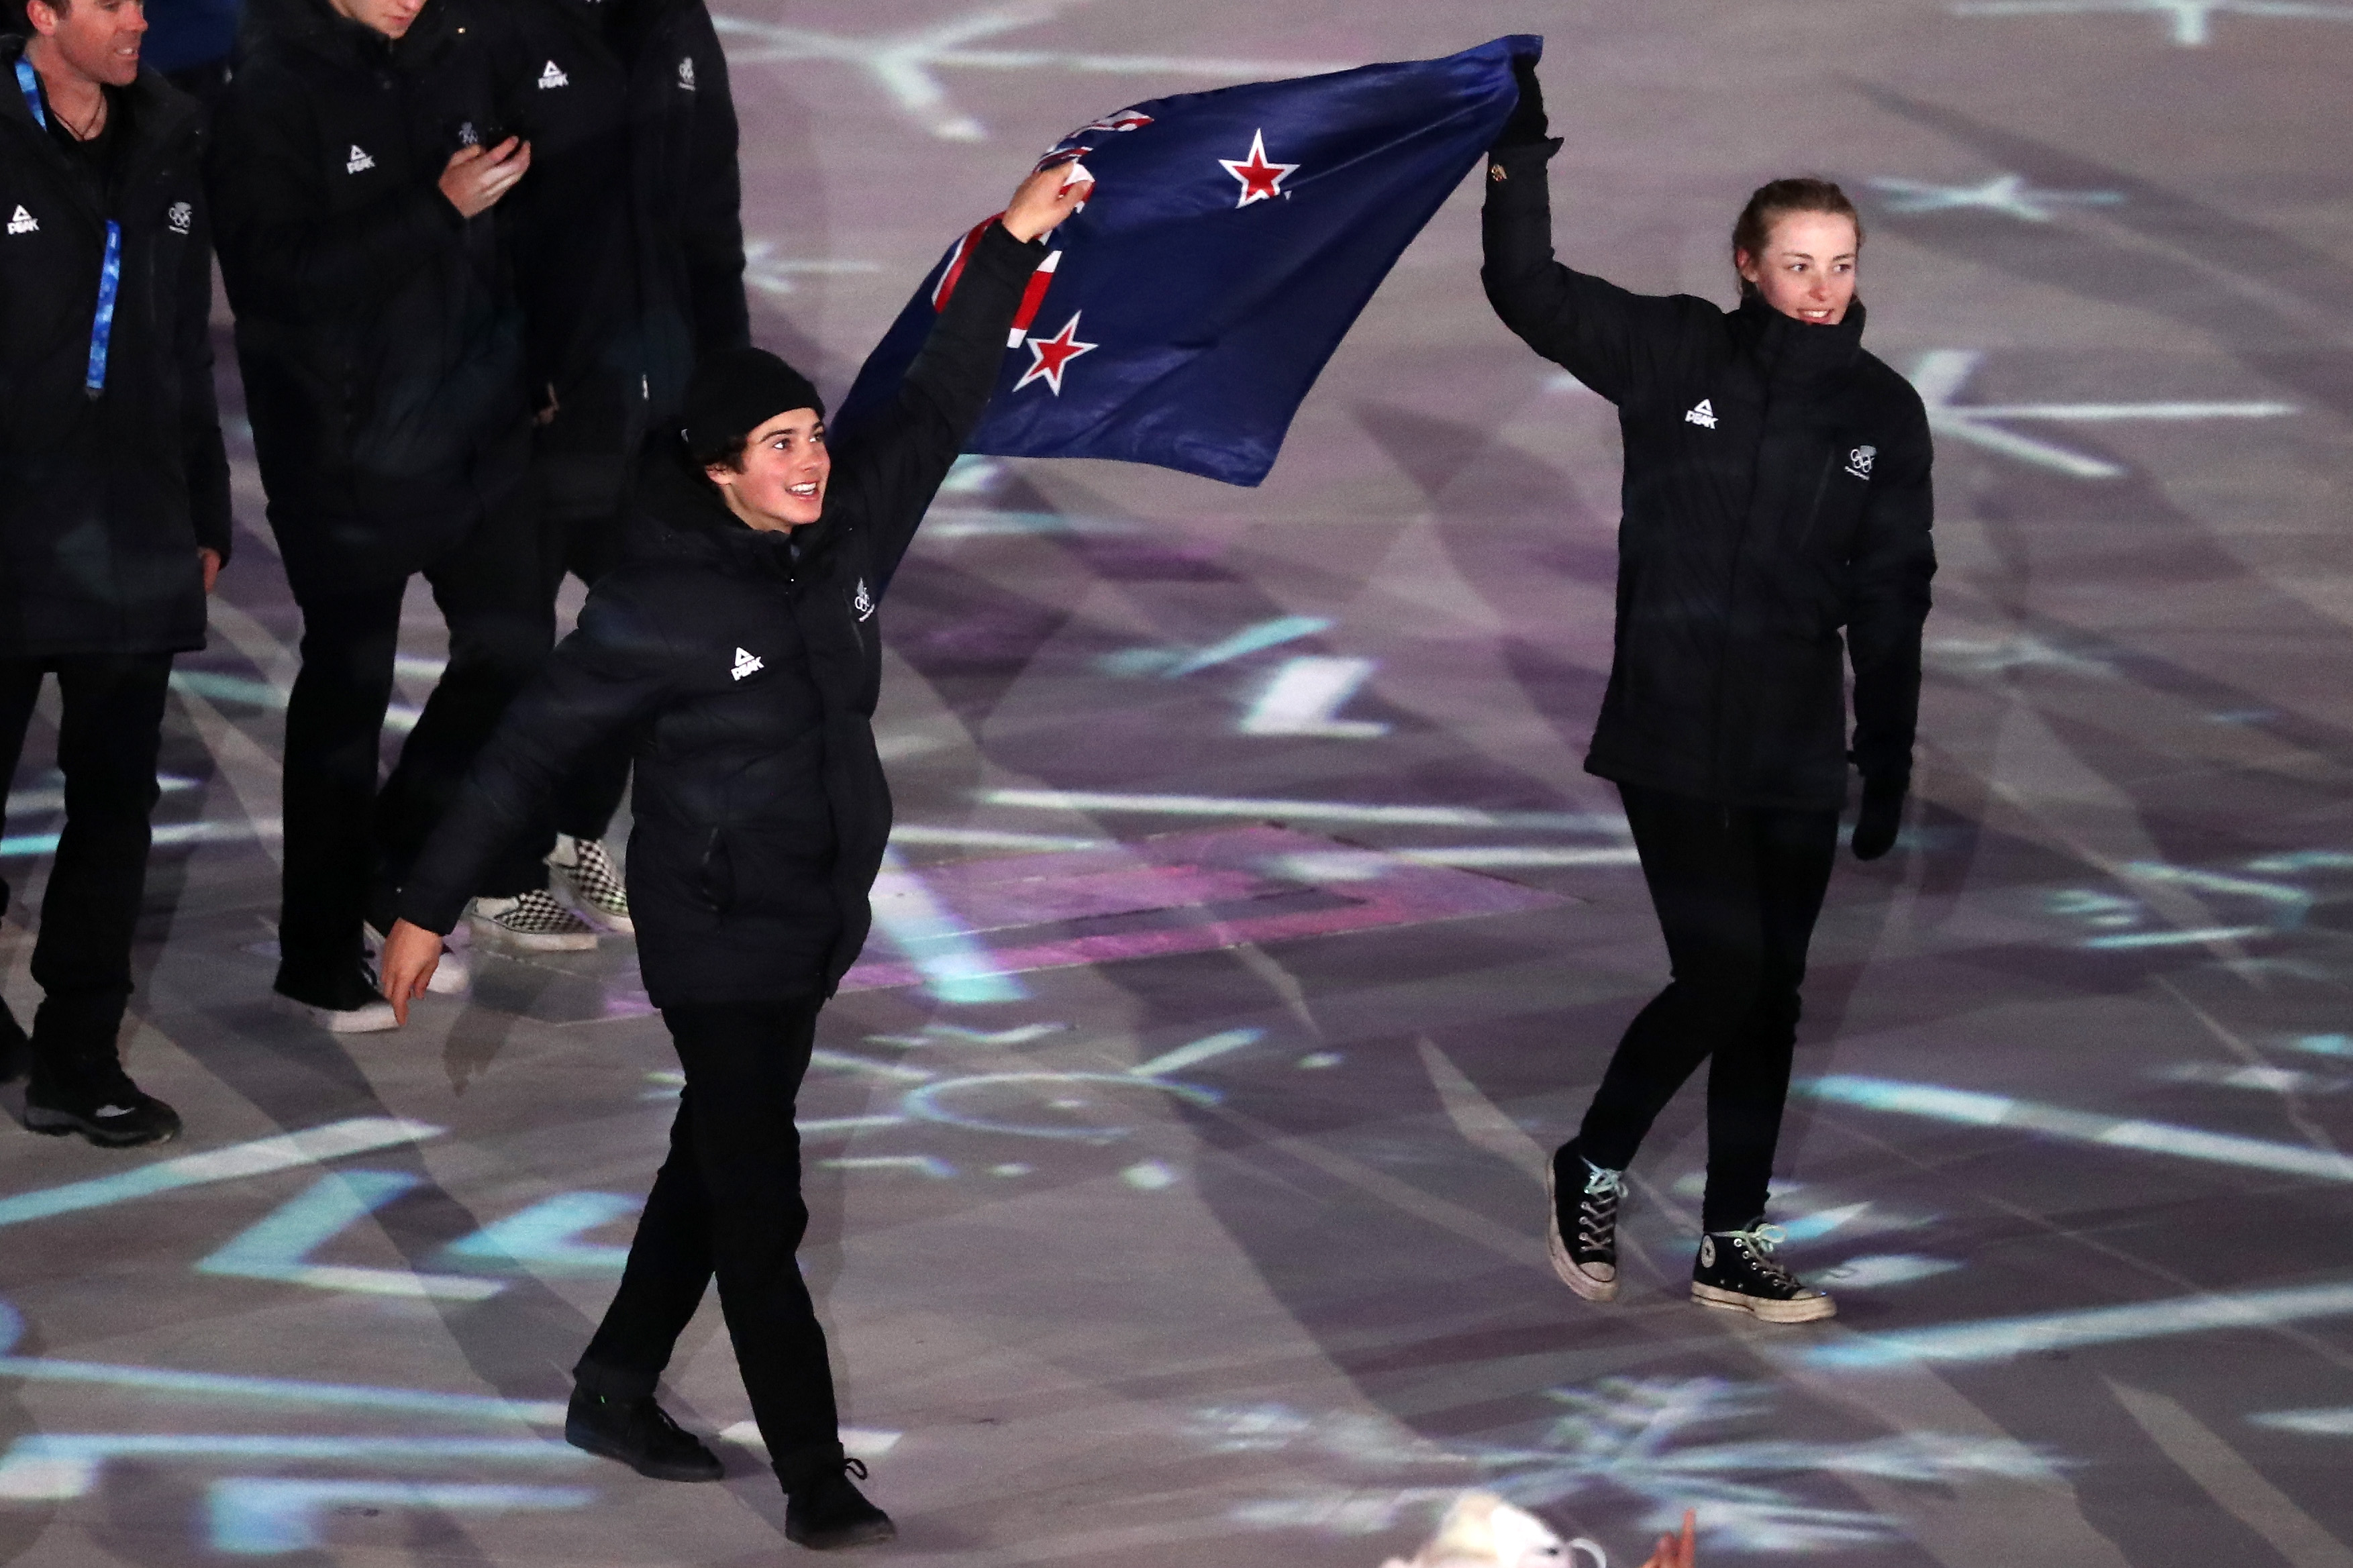 Bronze medallists Nico Porteous (left) and Zoi Sadowski-Synnott carried the flag in the Parade of...